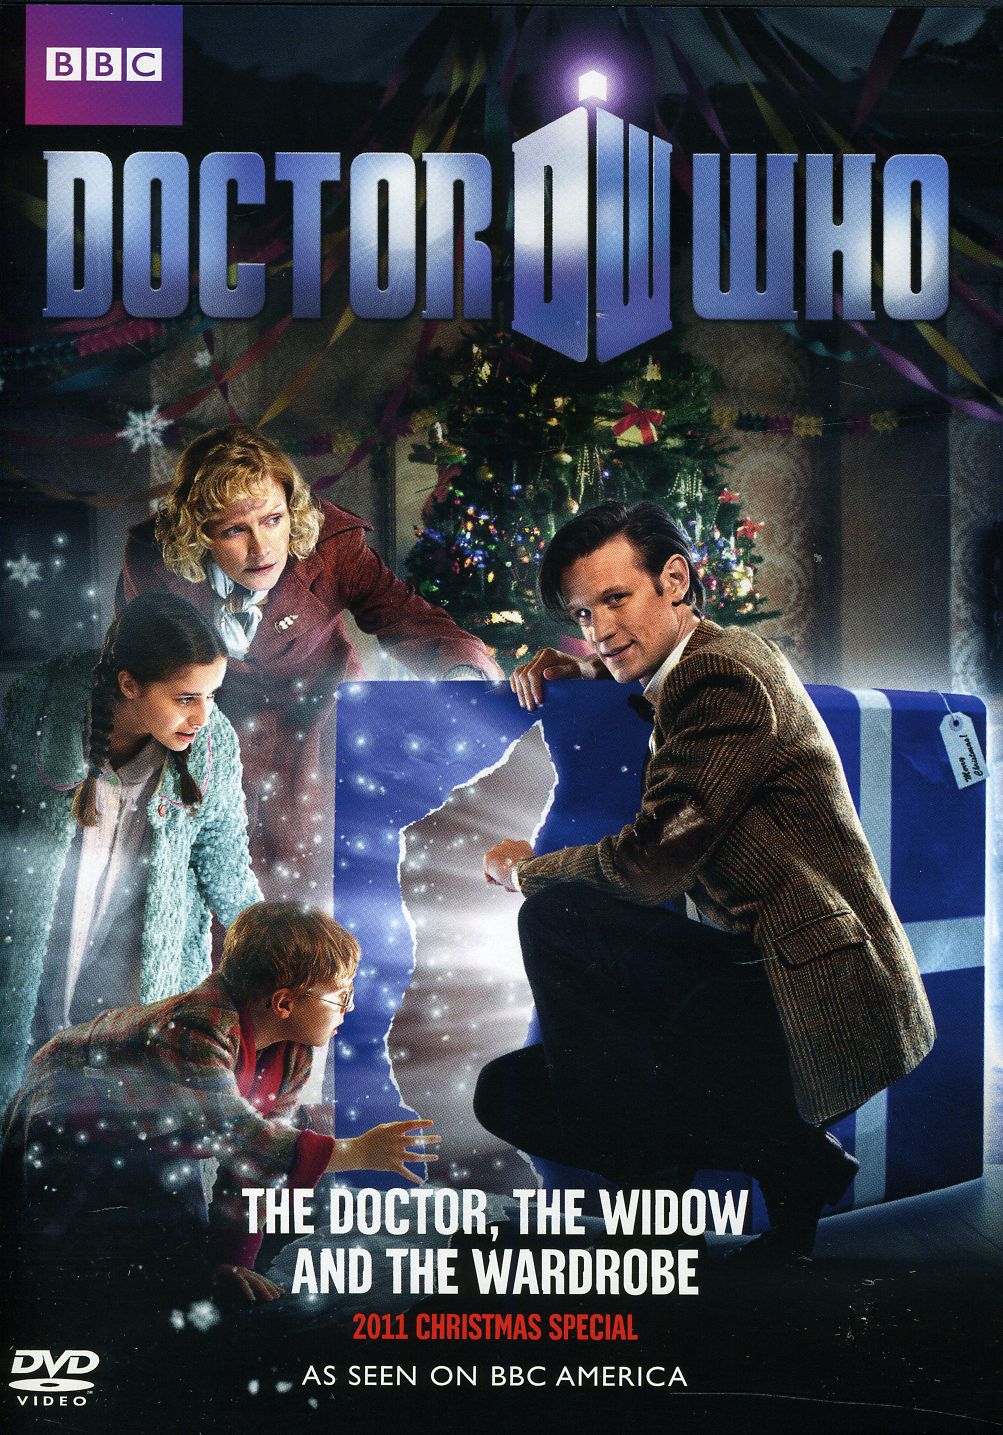 DOCTOR WHO: 2011 CHRISTMAS SPECIAL